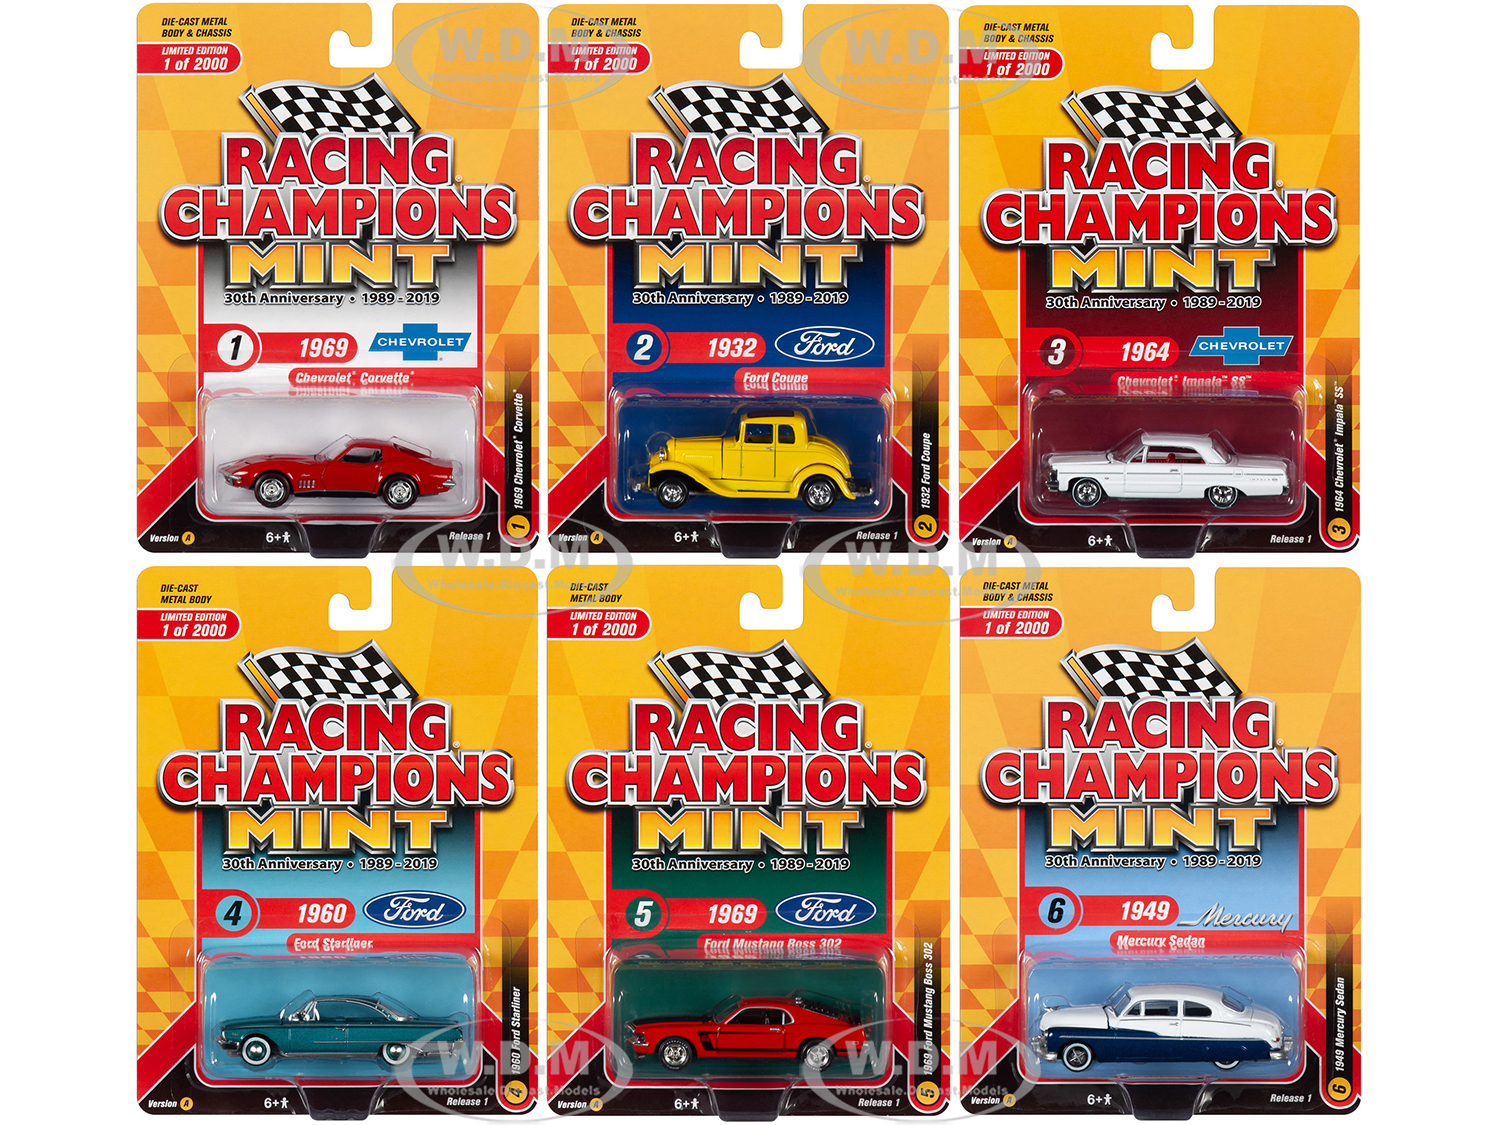 2019 Mint Release 1 Set A of 6 Cars "30th Anniversary" (1989-2019) Limited Edition to 2000 pieces Worldwide 1/64 Diecast Models by Racing Champions